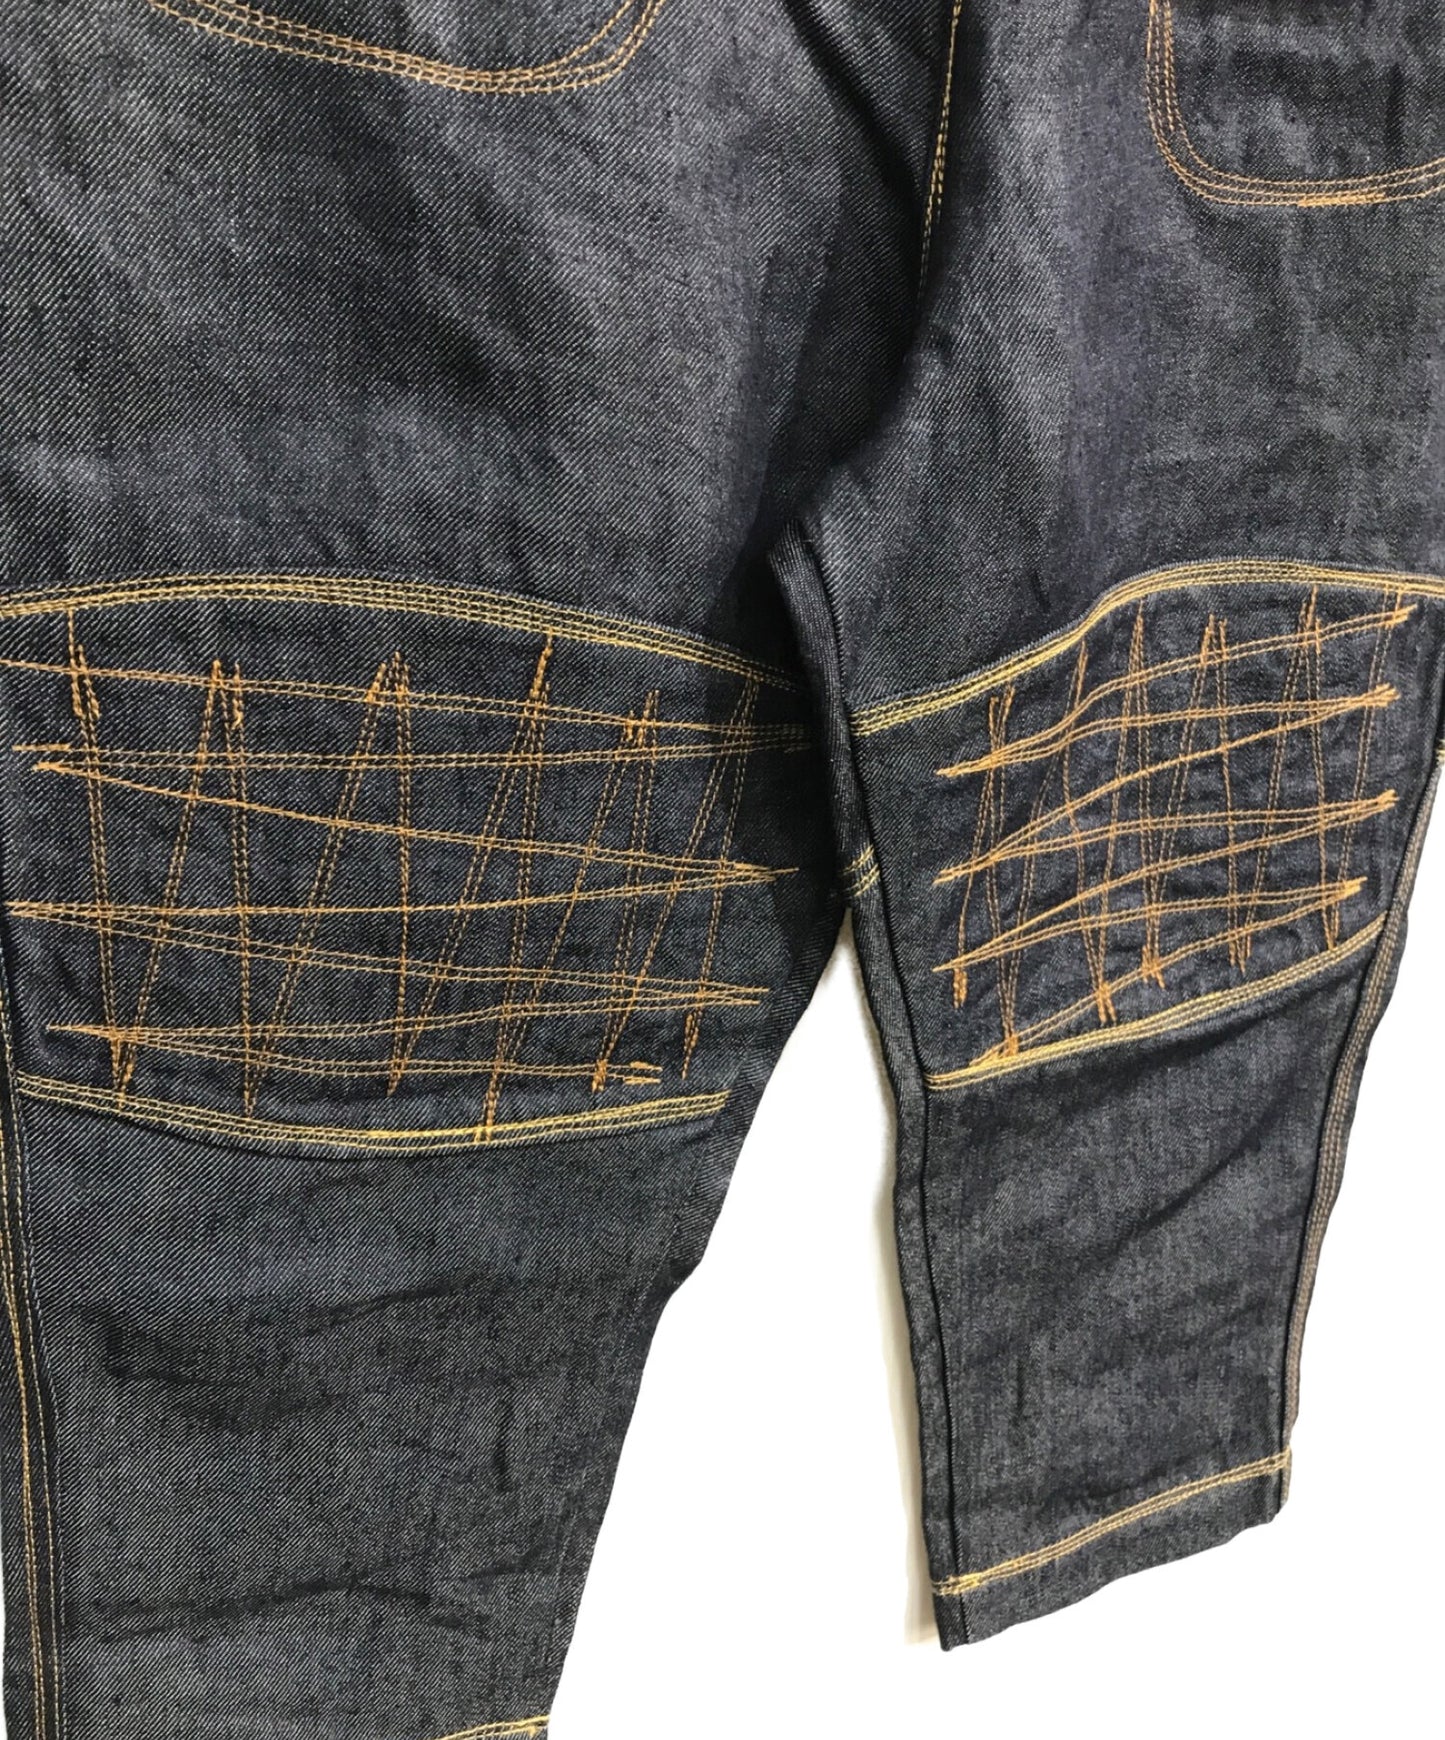 [Pre-owned] COMME des GARCONS JUNYA WATANABE MAN Linen stitched denim pants WG-P025 AD2020 WG-P025